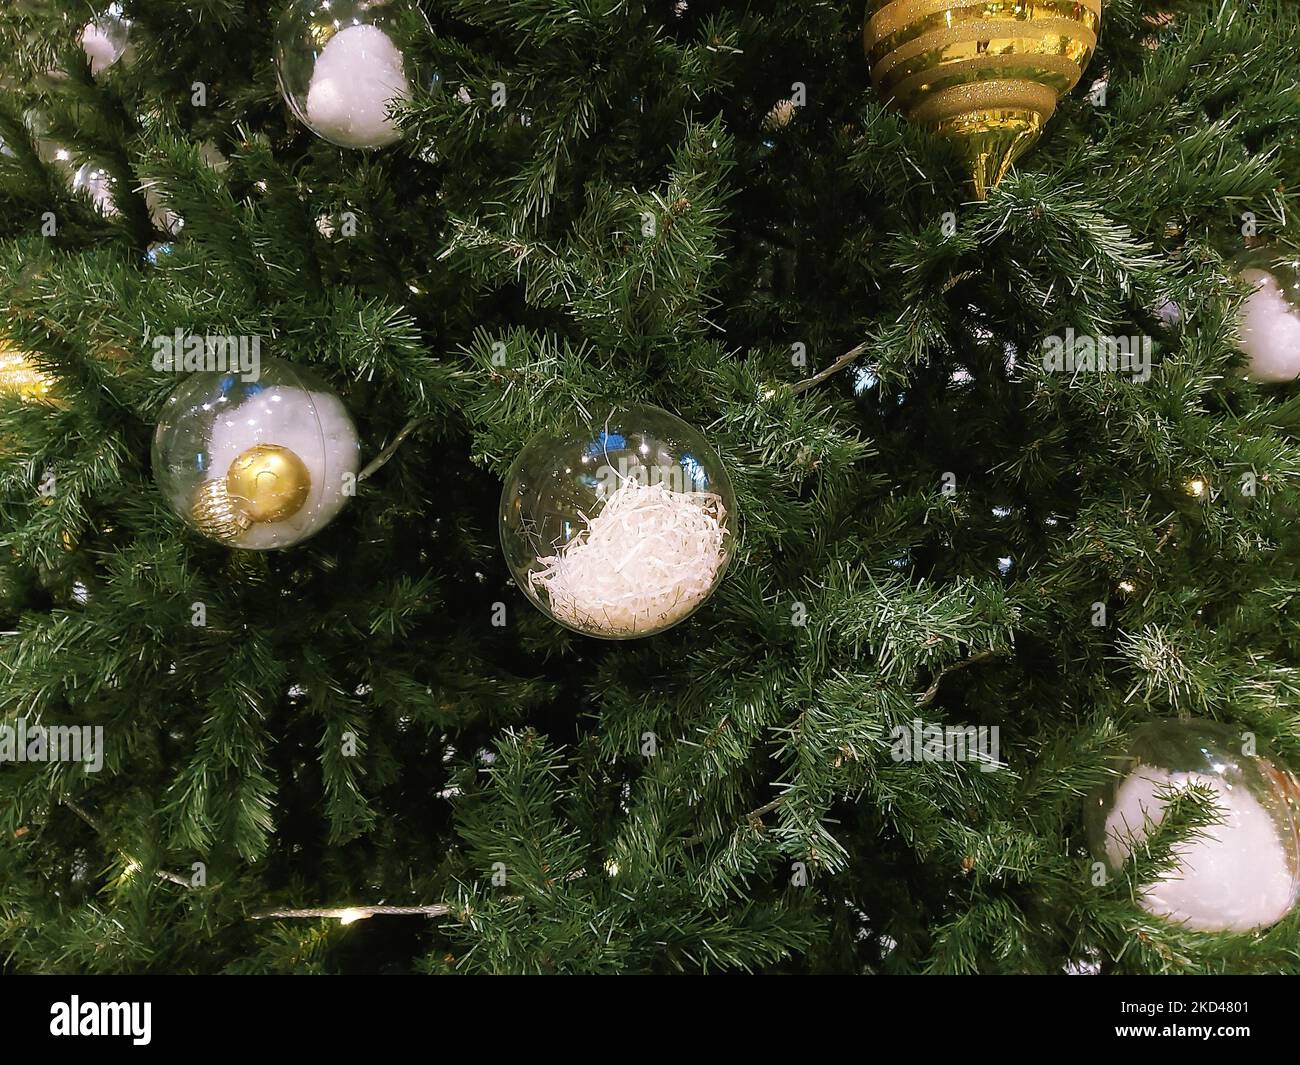 Variety of New Year's toys hang on a green Christmas tree for the eve of the holiday. Stock Photo